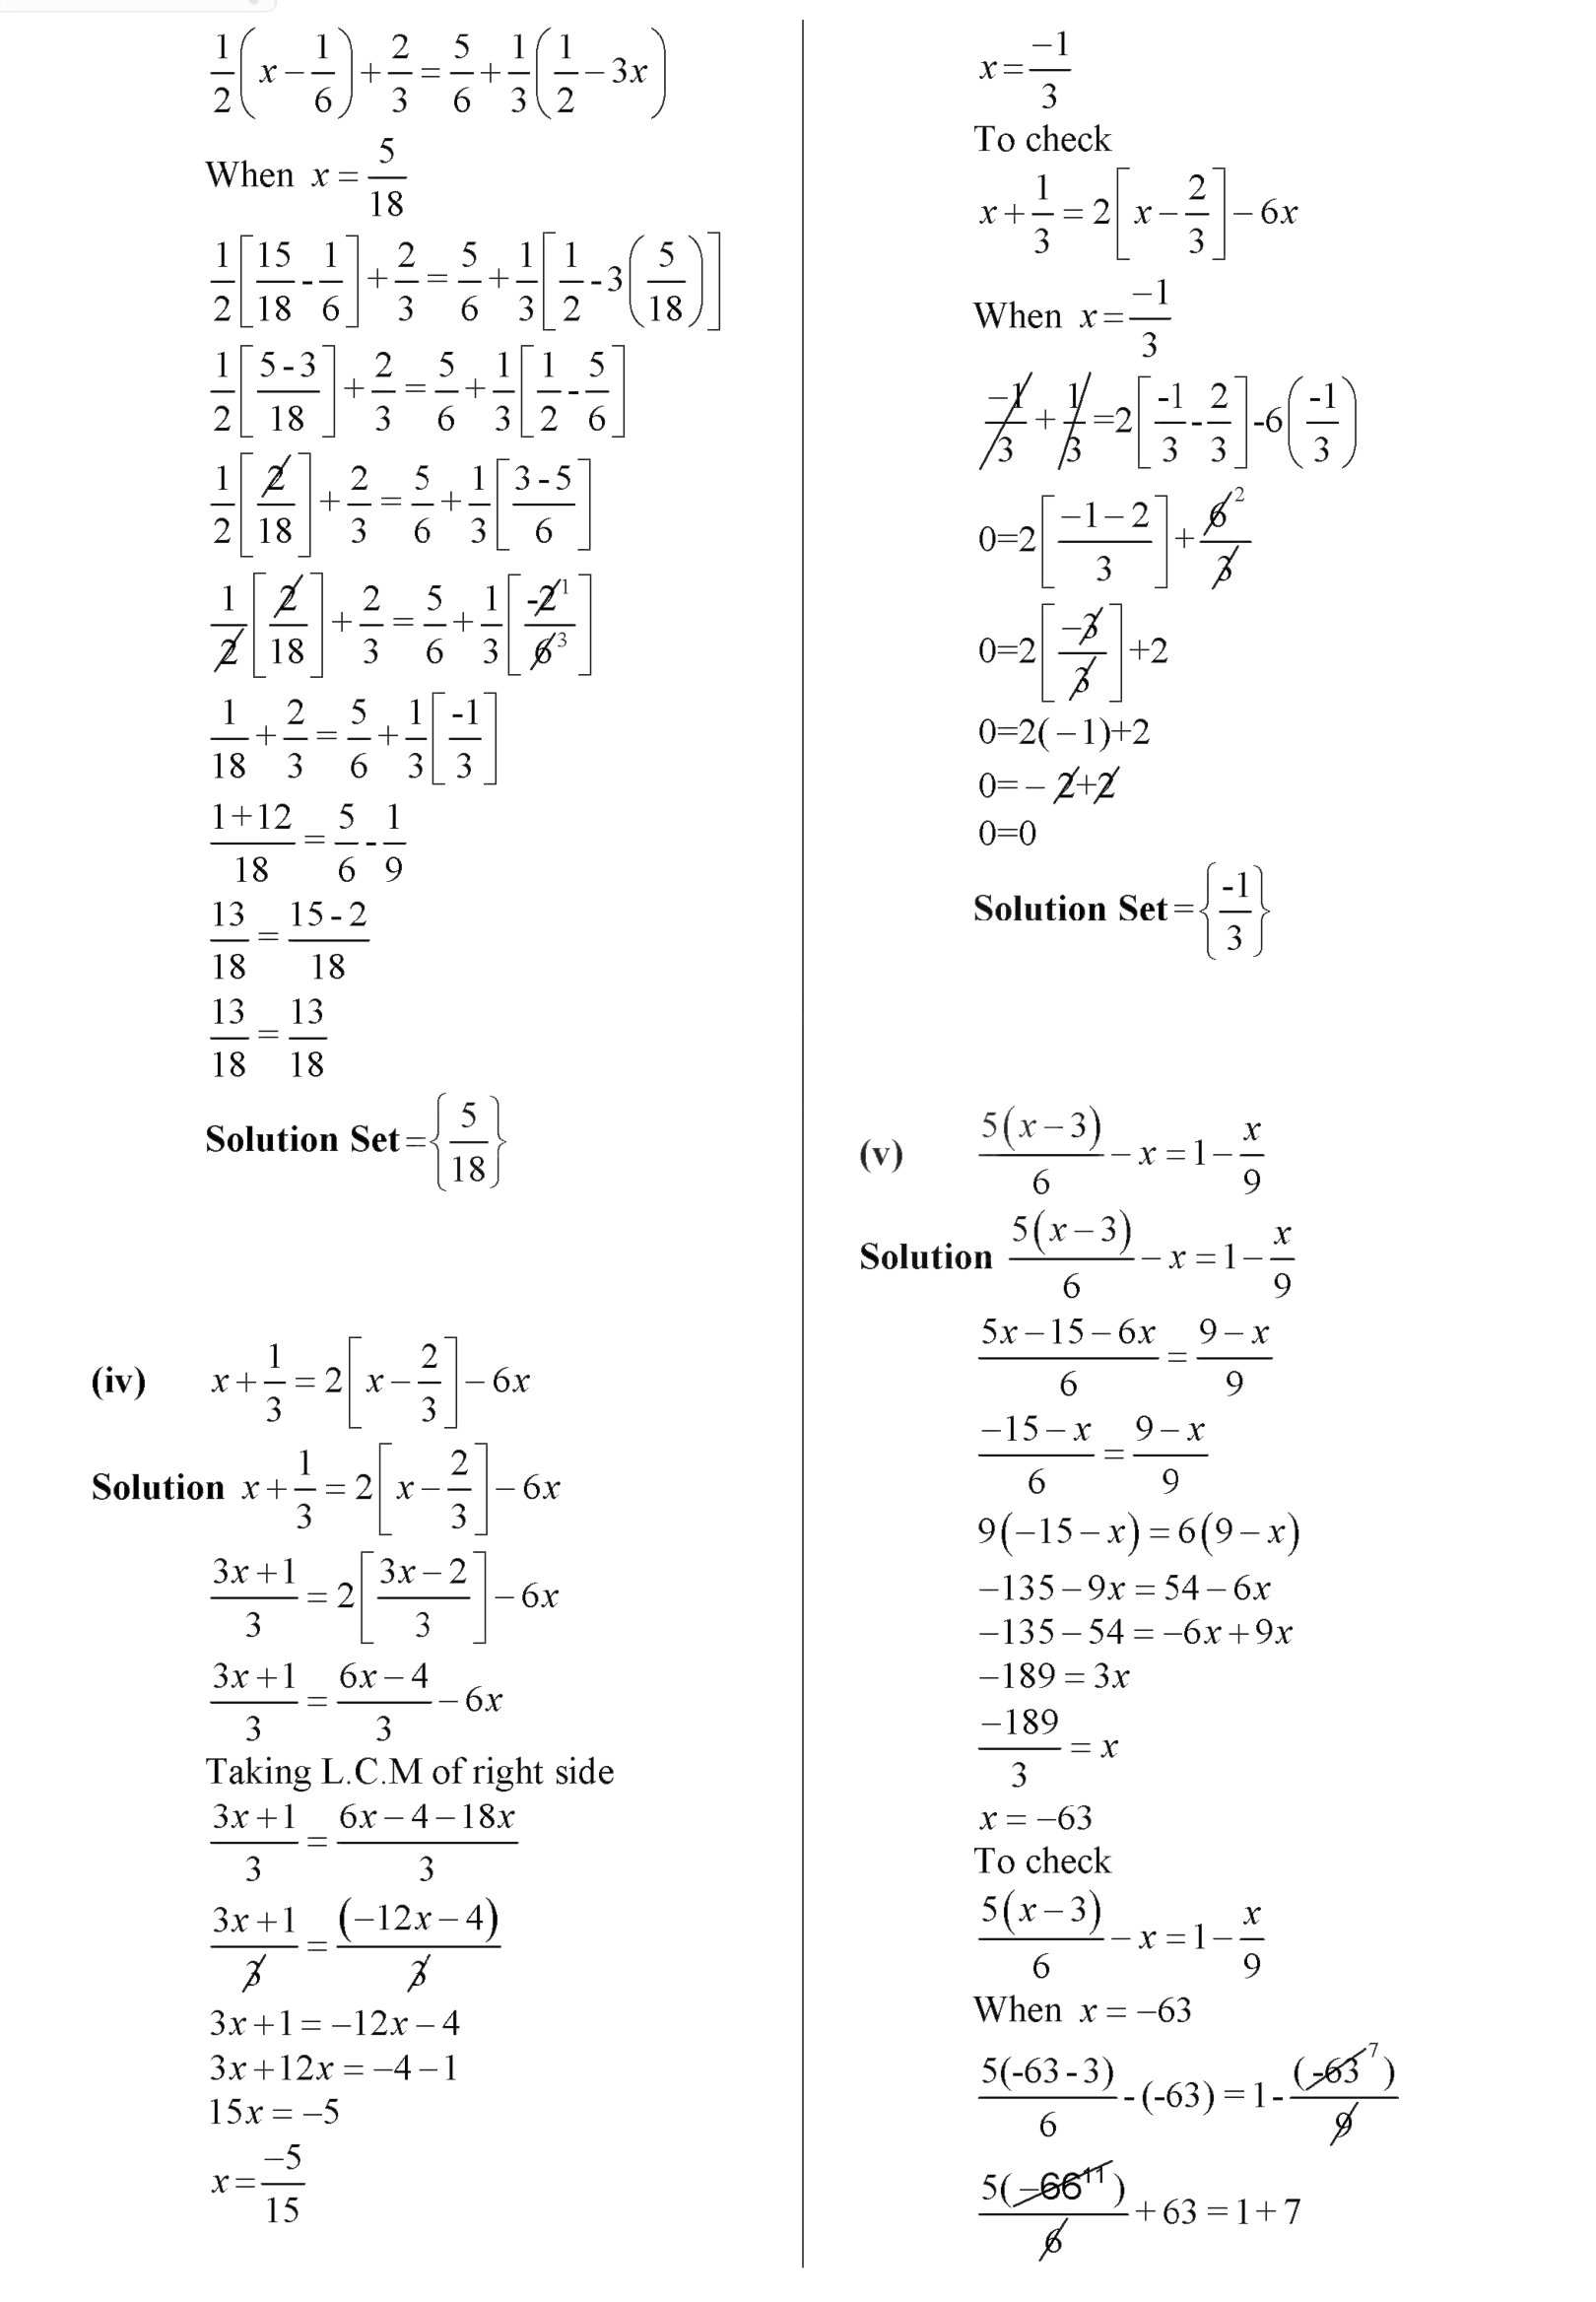 Chapter Name: Linear Equations and Inequalities